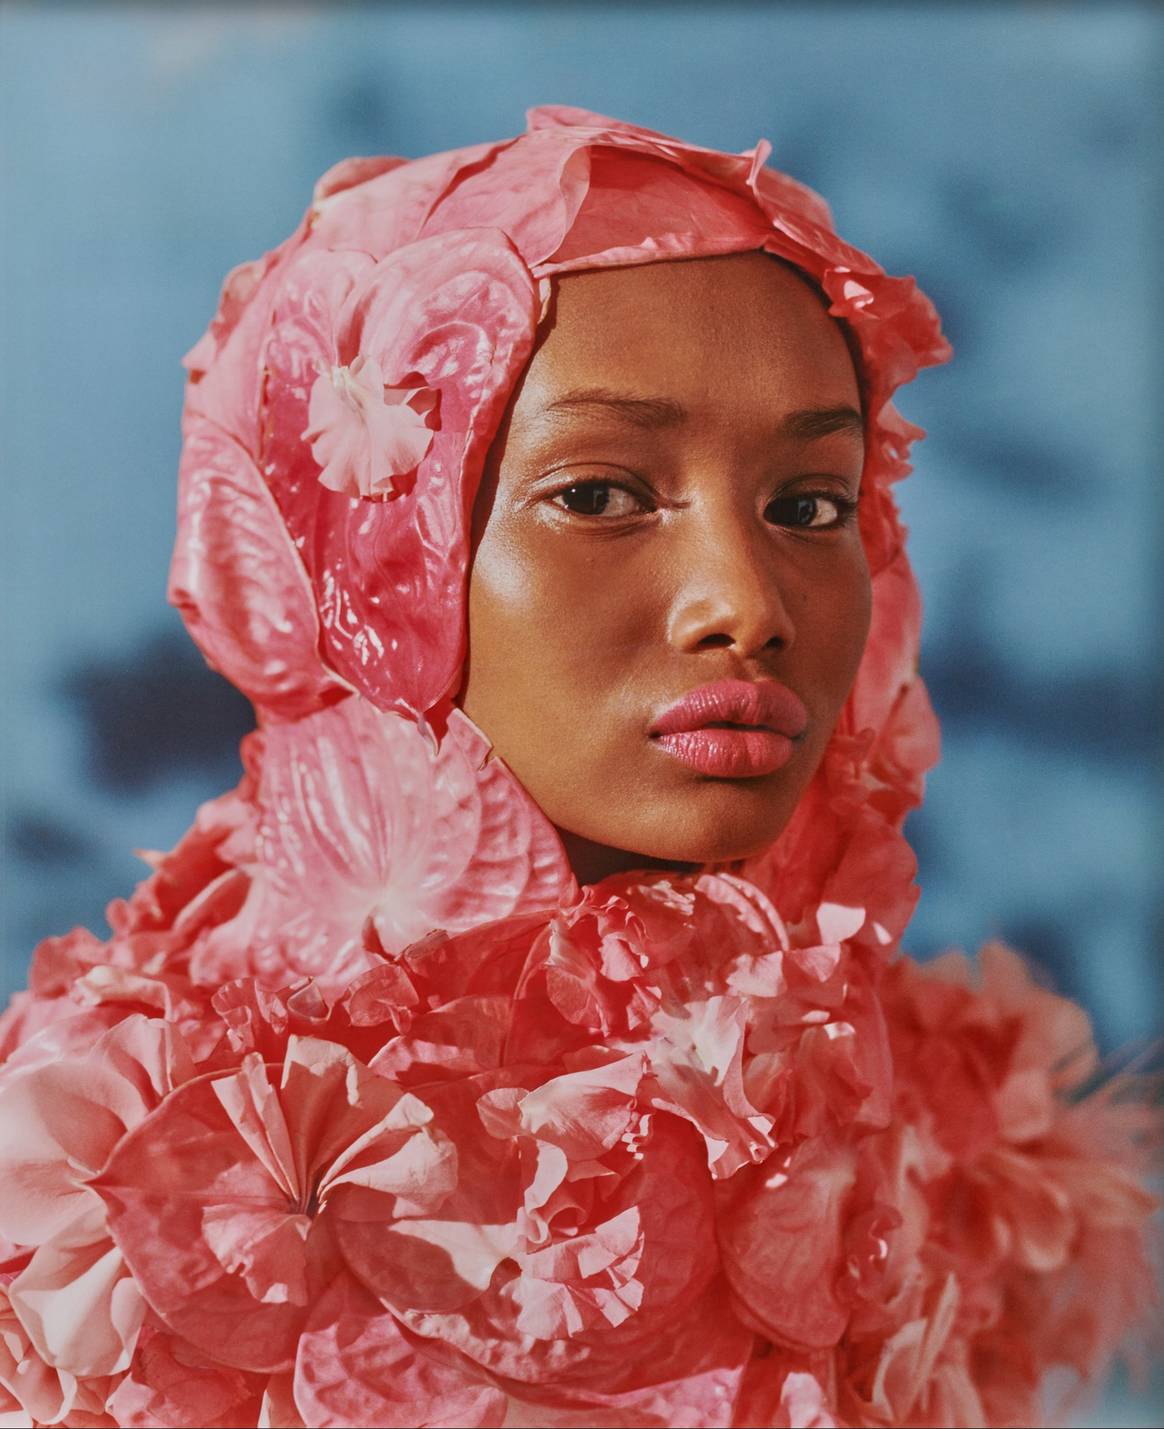 Tyler Mitchell, Untitled (Hijab Couture), for US Vogue, 2019. Pigment print, printed 2020. Edition 3 of 3. Nicola Erni Collection. Beeld: Noordbrabants Museum